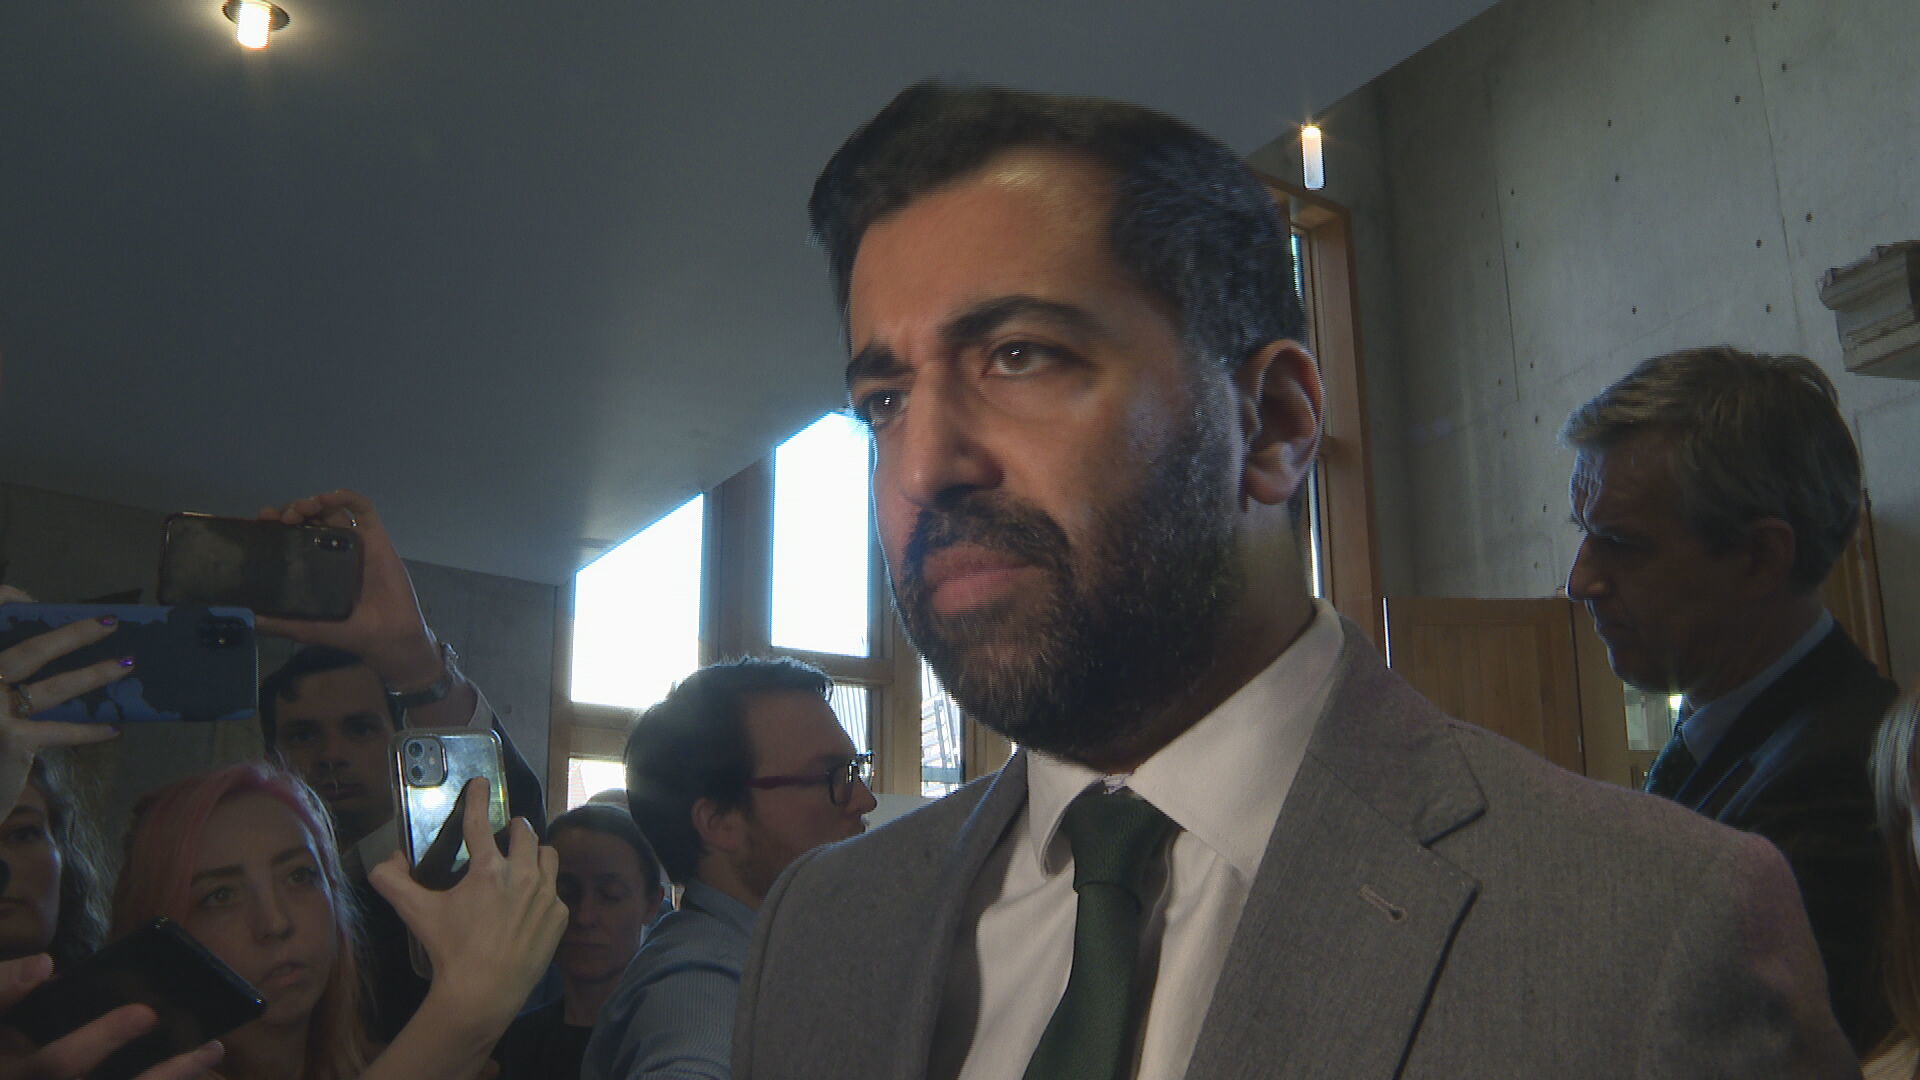 First Minister Humza Yousaf faced questions from journalists after FMQs on Thursday.